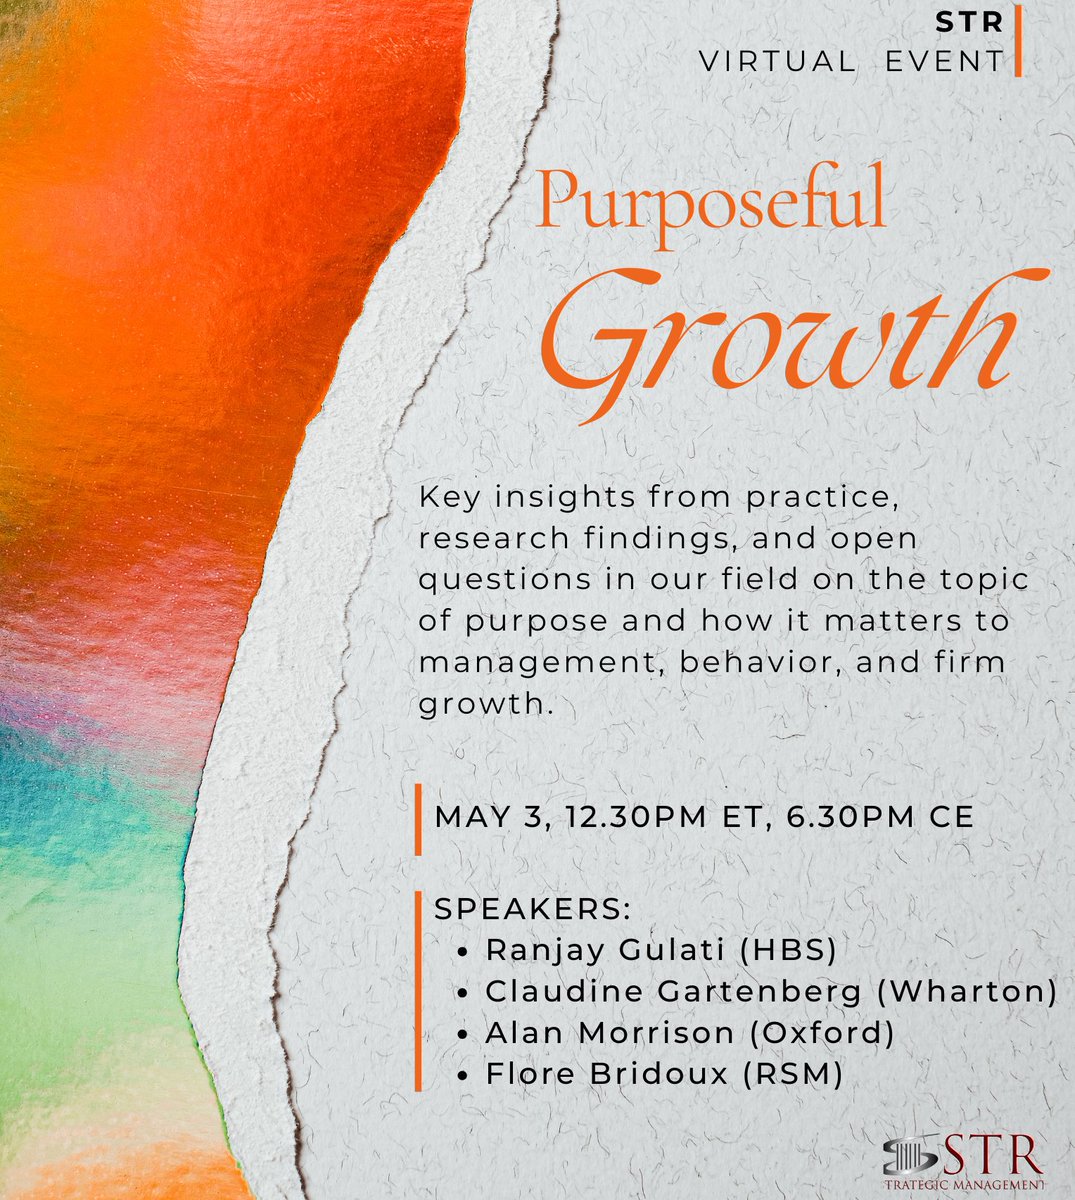 🤔How can firms embrace purpose in today's turbulent environment? Join our #STR virtual event “Purposeful Growth” on May 3 at 12.:30pm ET, with @RanjayGulati @Cmgartenberg, Alan Morrison & Flore Bridoux 💡 Register🔛us02web.zoom.us/meeting/regist…